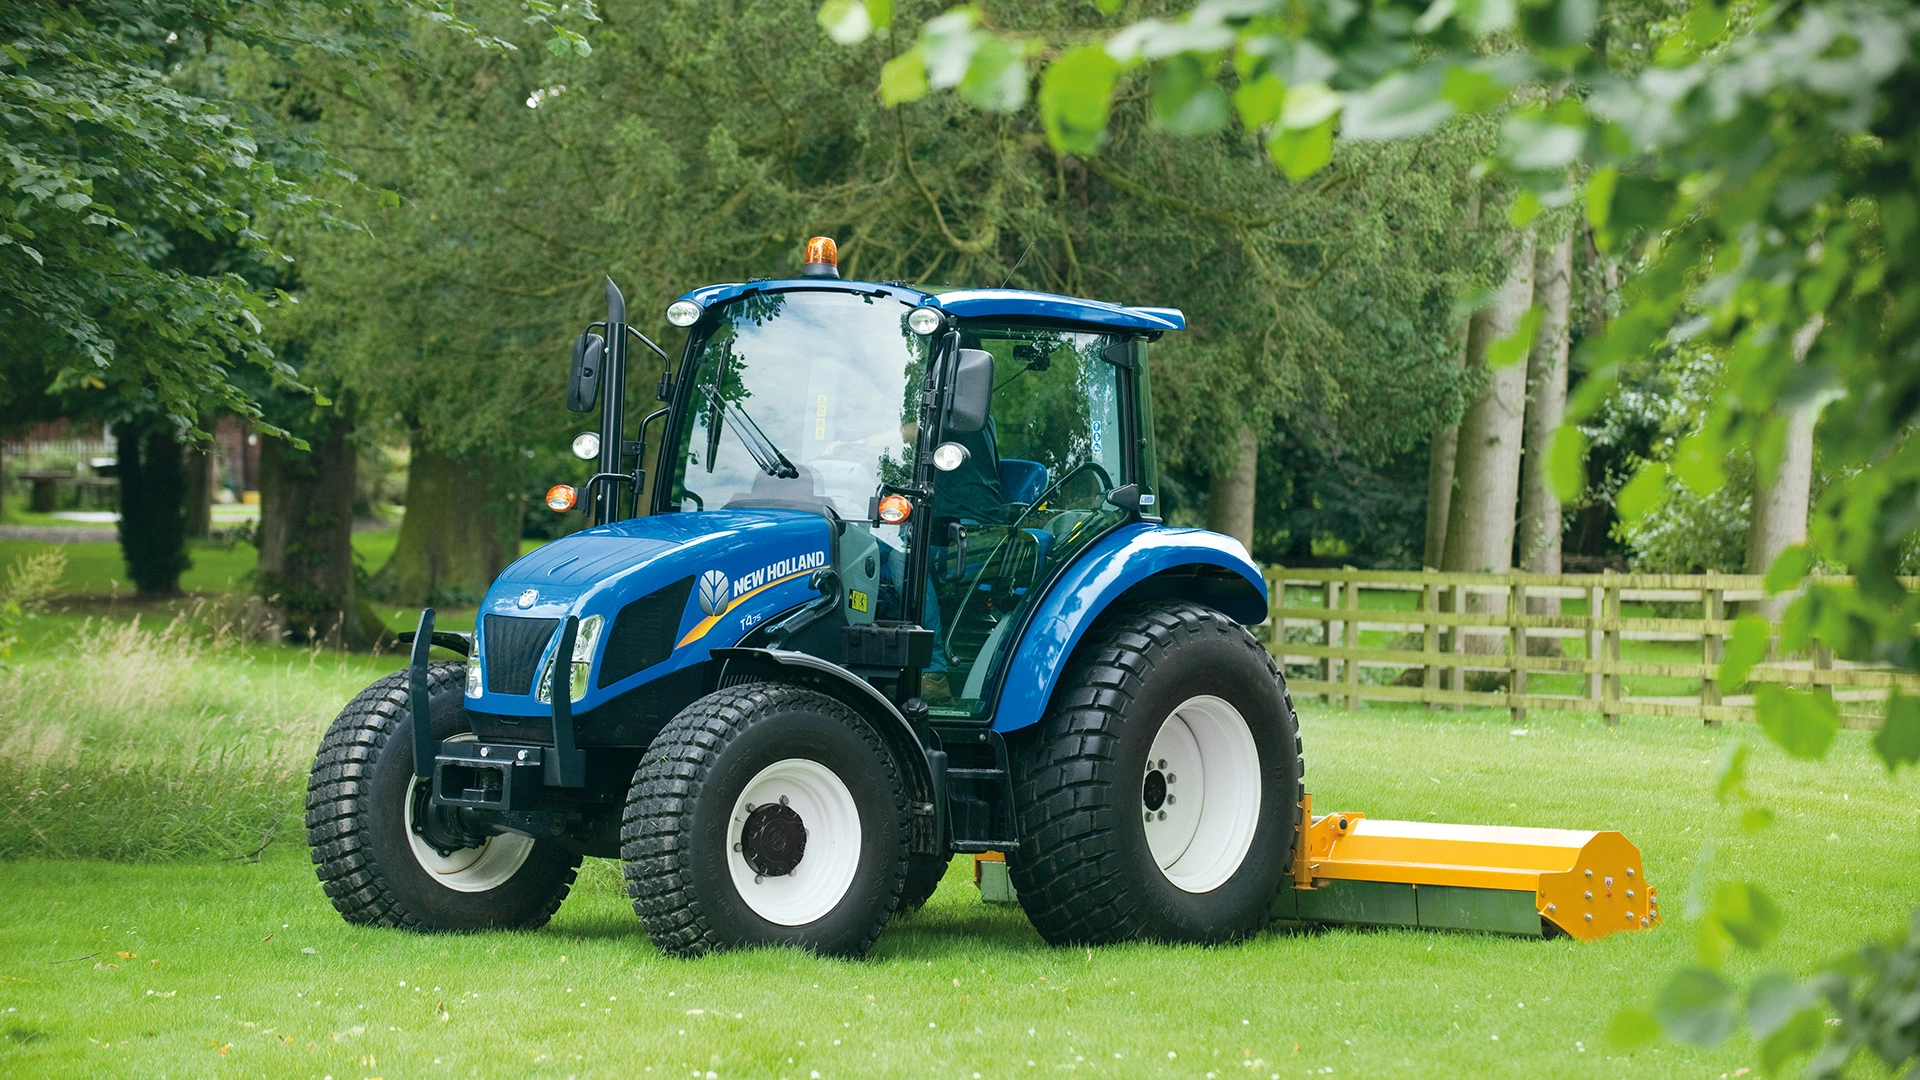 New Holland T4 tractor with a mounted mower